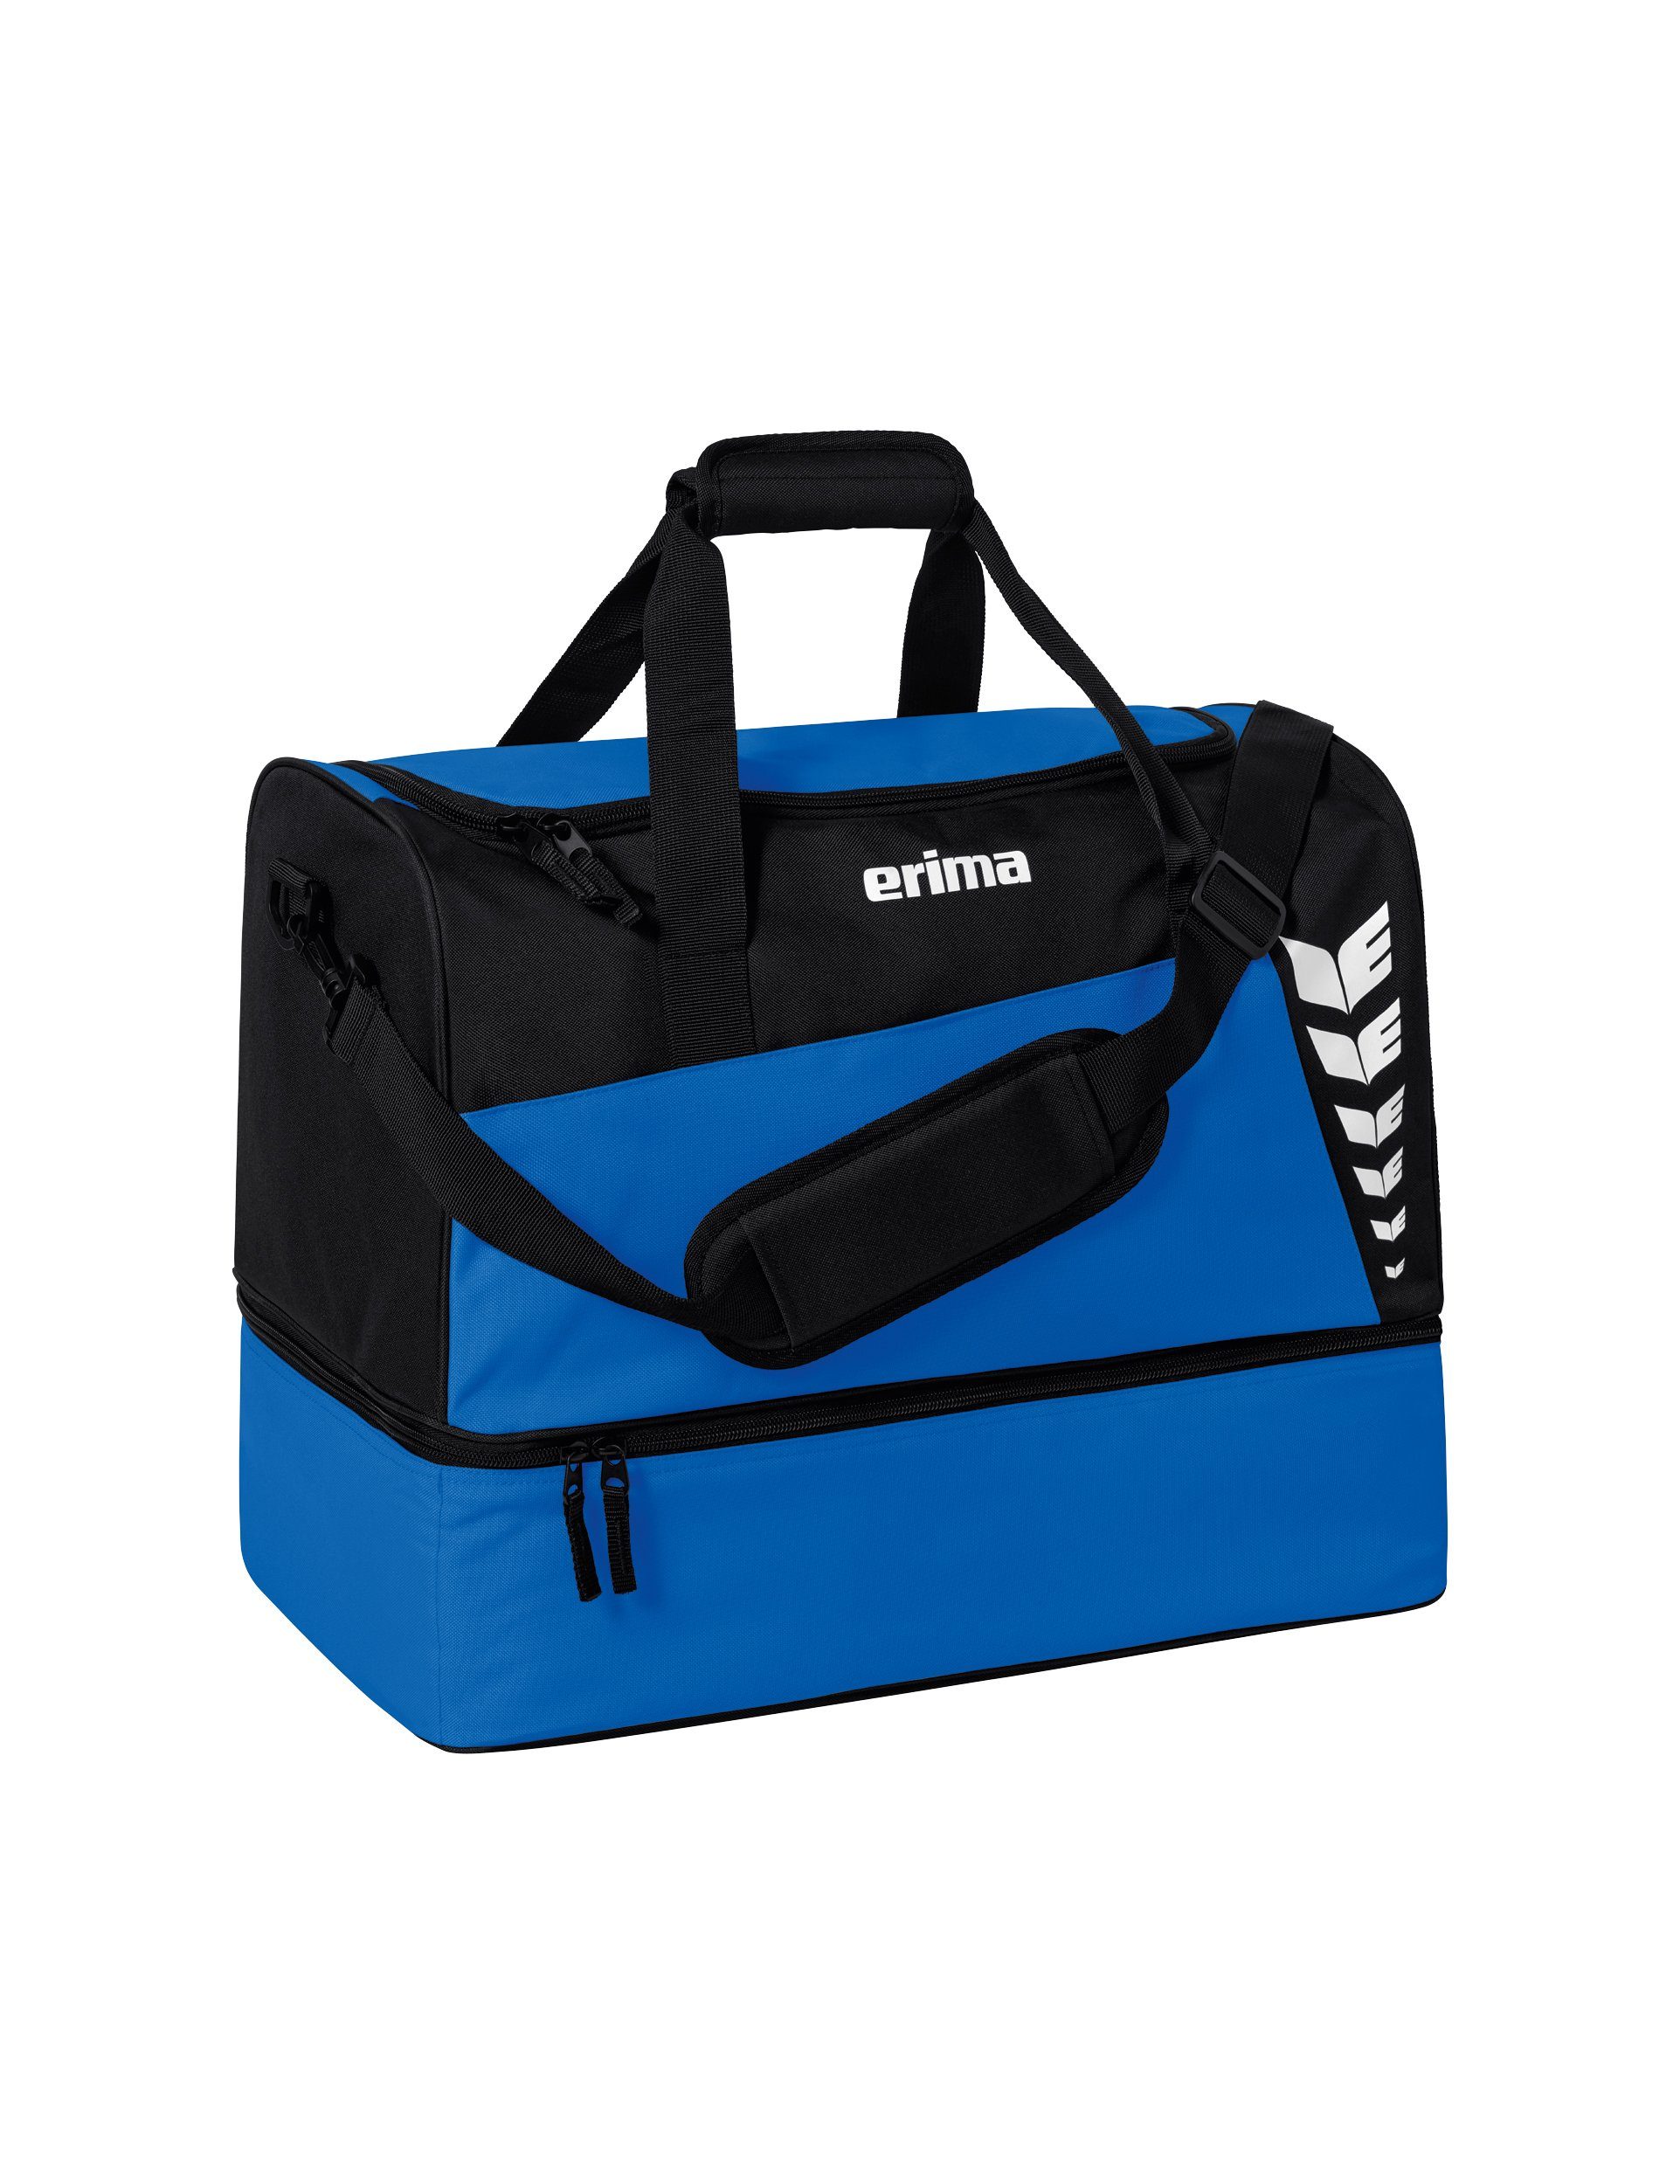 botto Erima WINGS royal/black SIX sportsbag new with Sporttasche